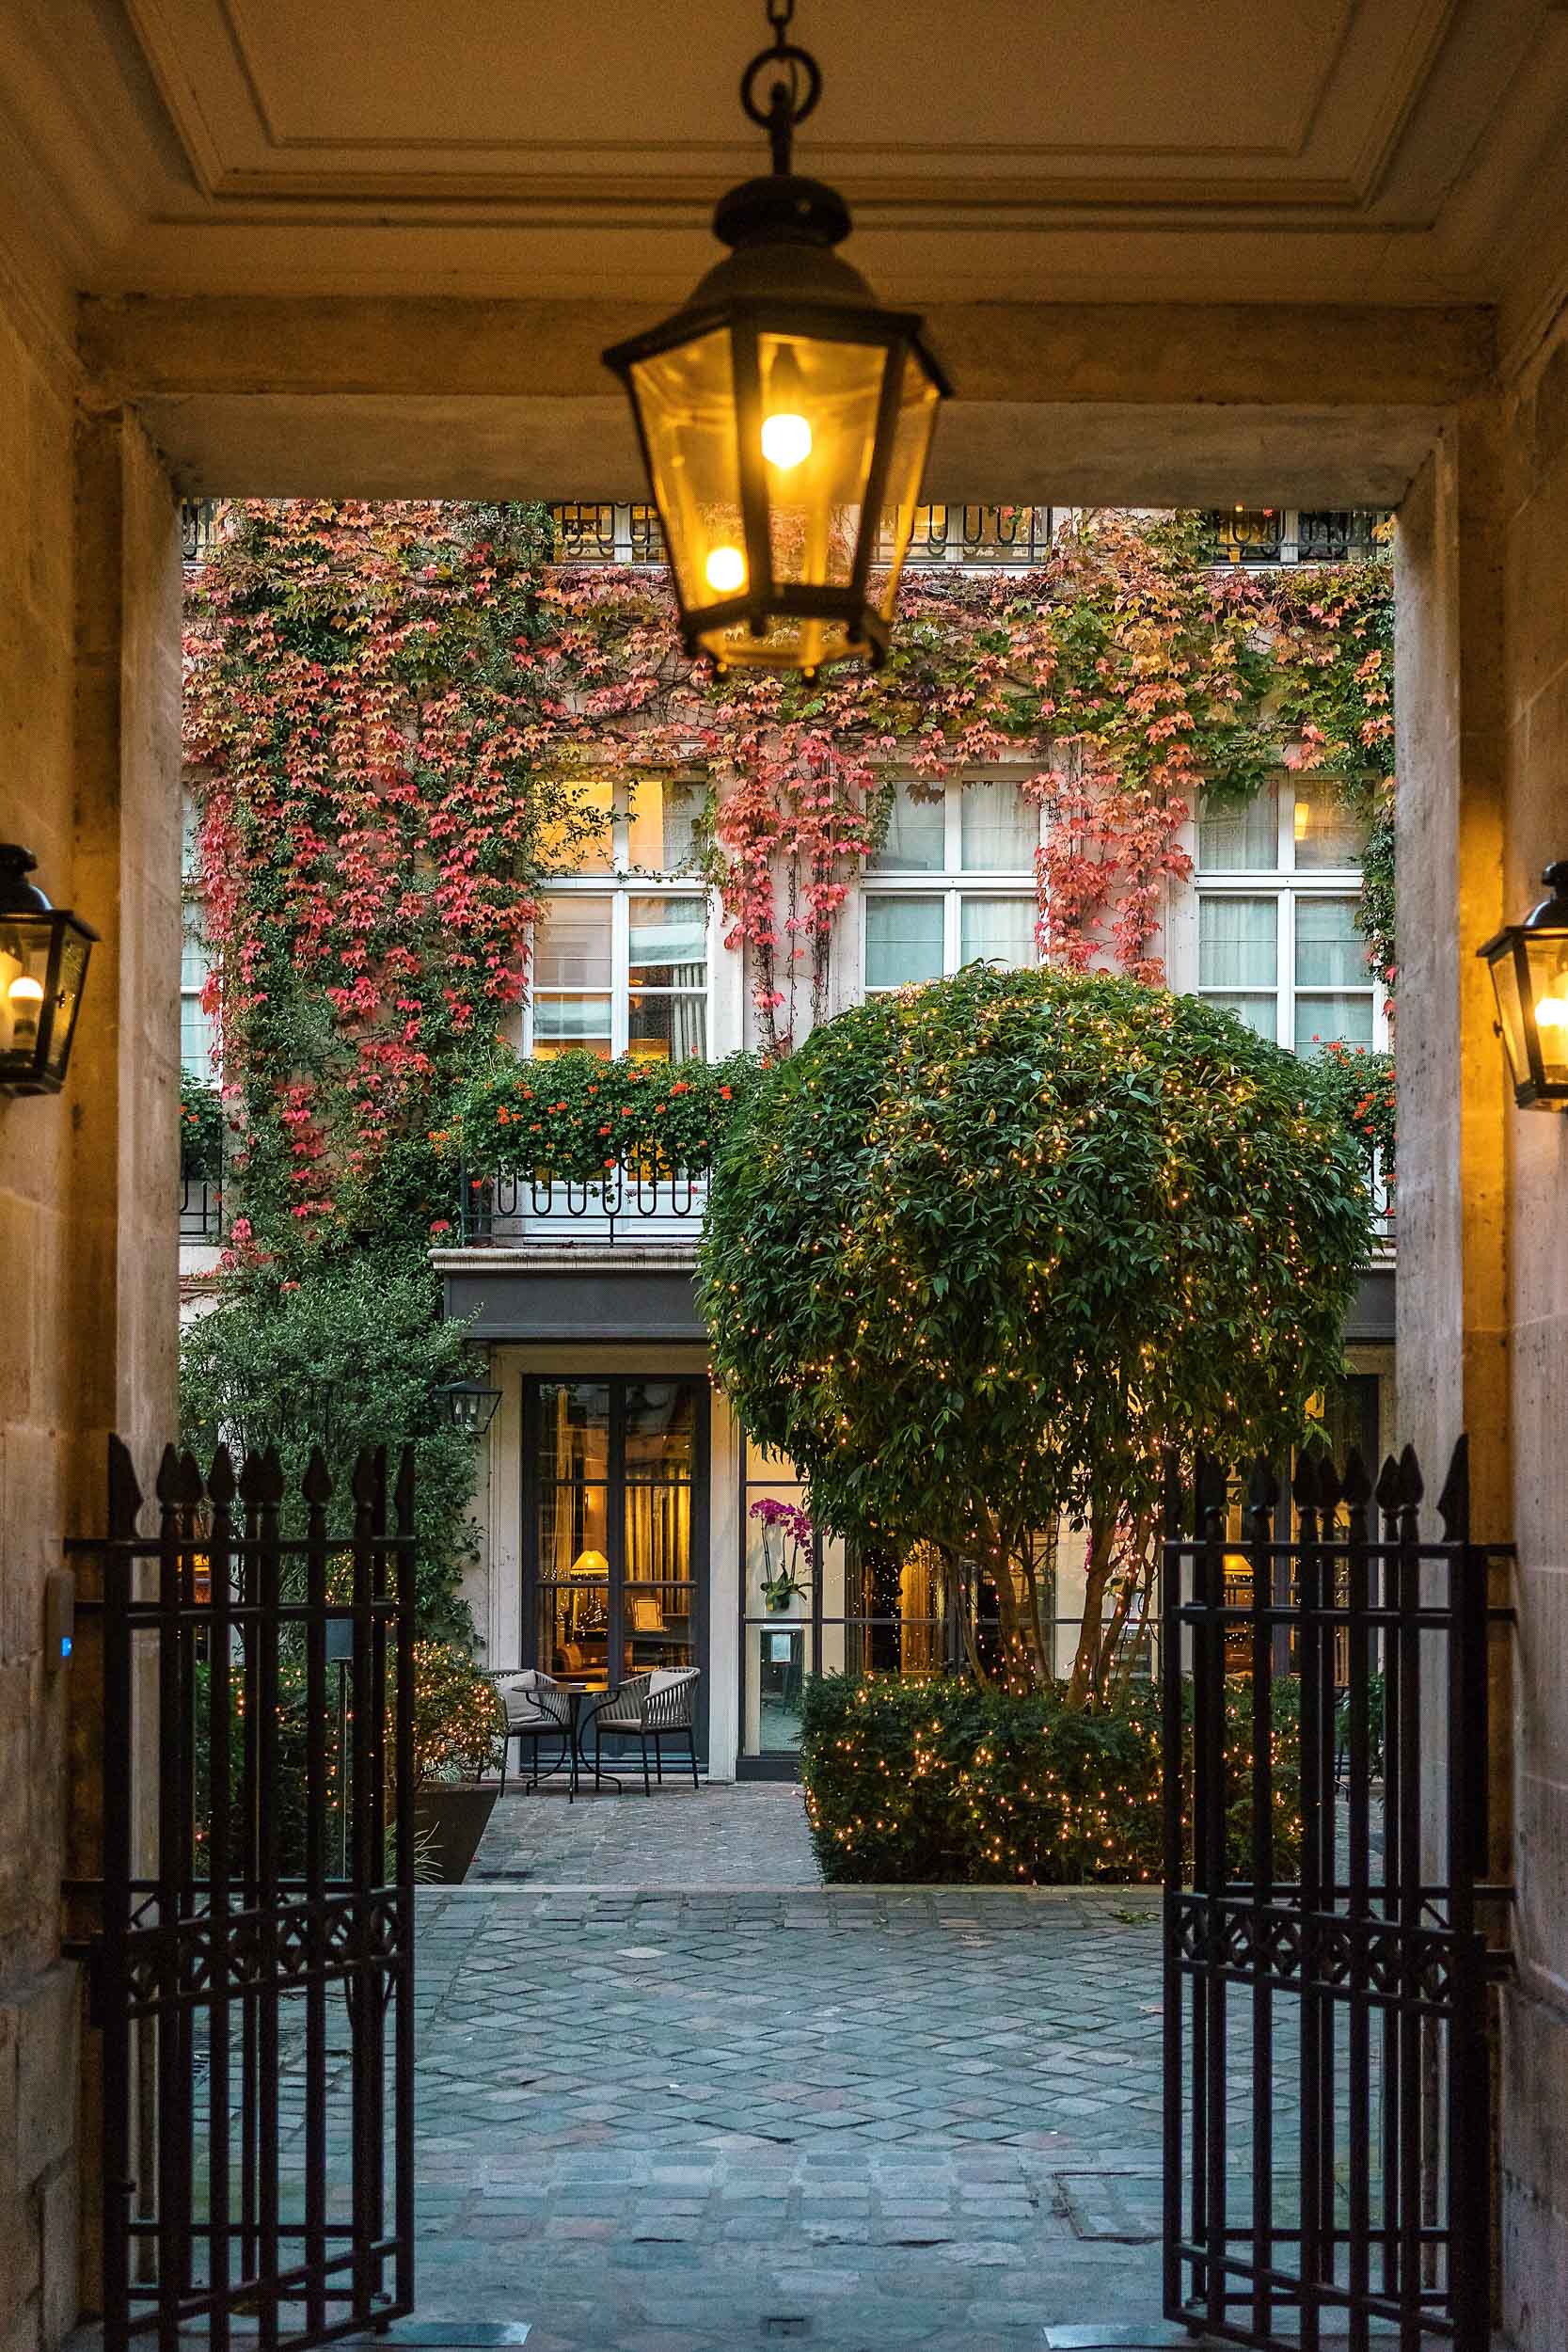 Access to Pavillon de la Reine is via a private garden courtyard set back from Place des Vosges, making it feel like your own private hideaway